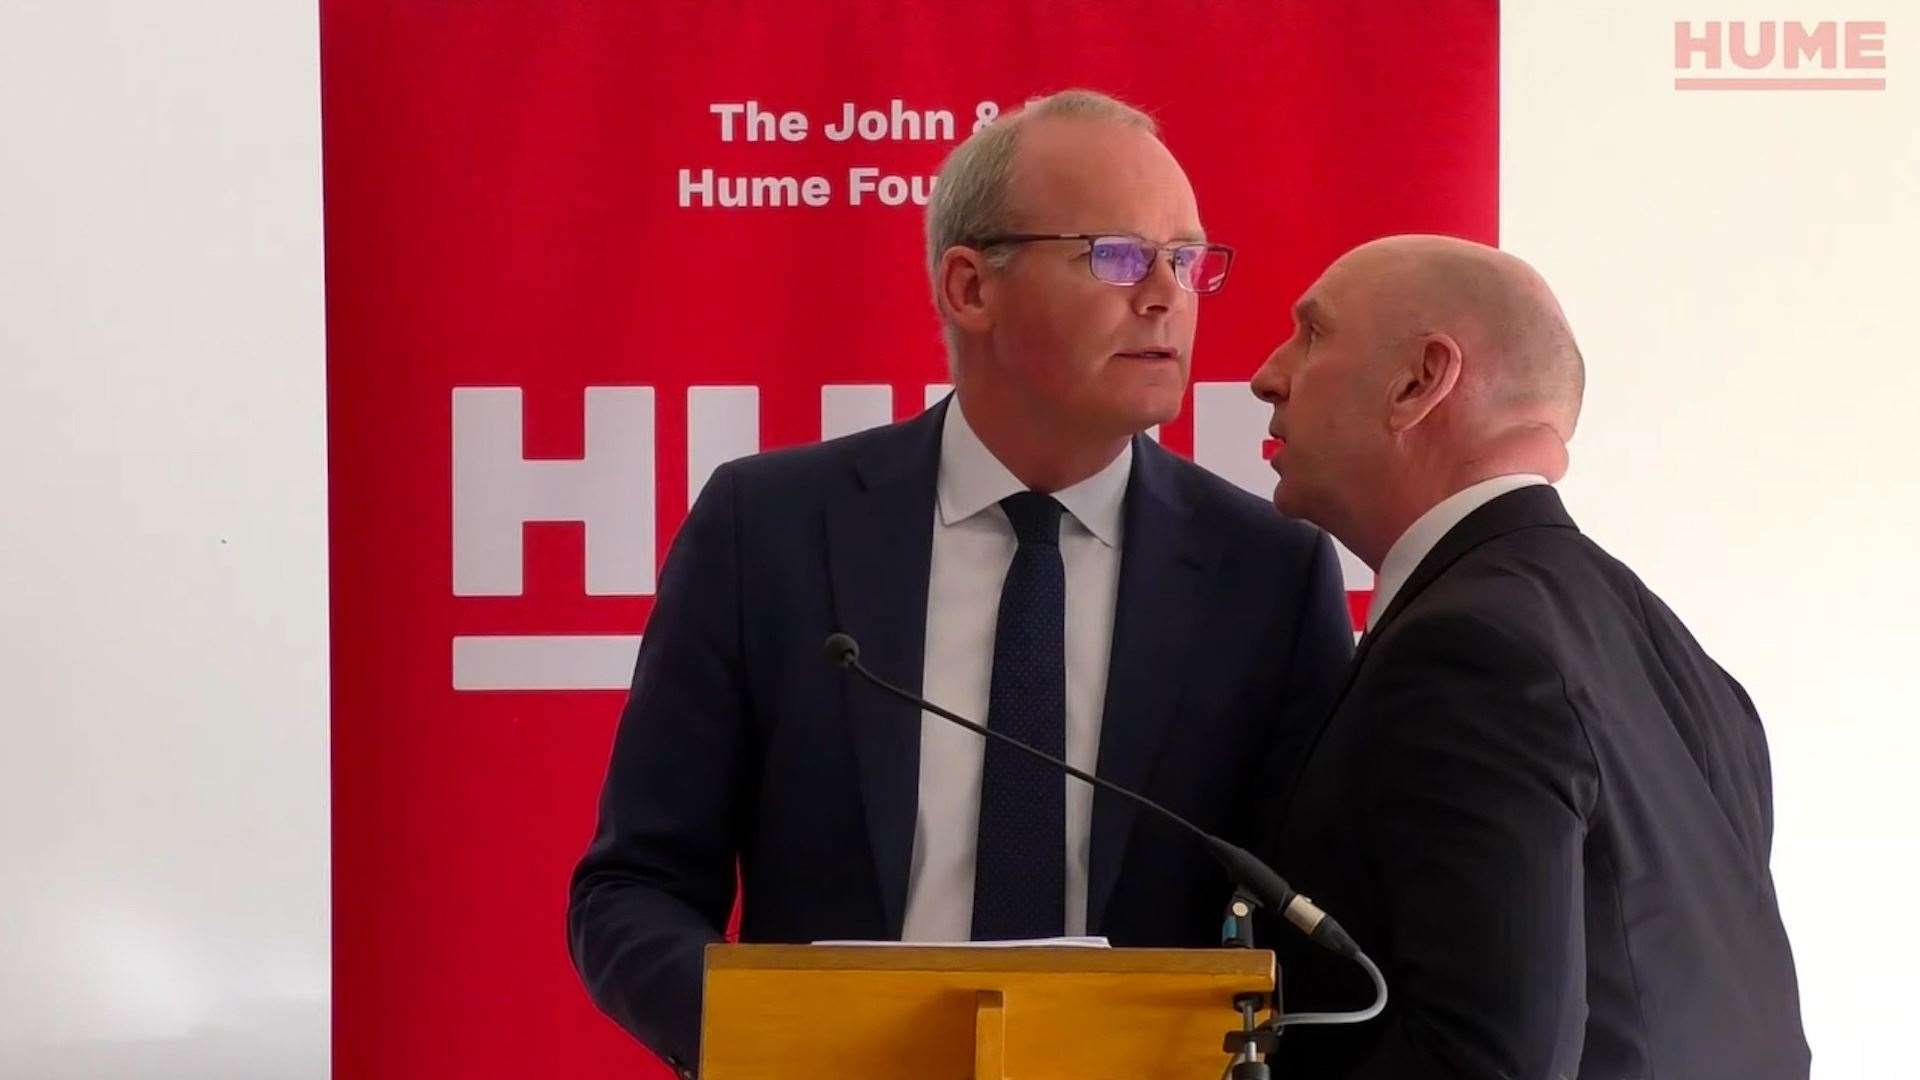 Simon Coveney is ushered from the room due to a security alert in Belfast (Hume Foundation/PA)